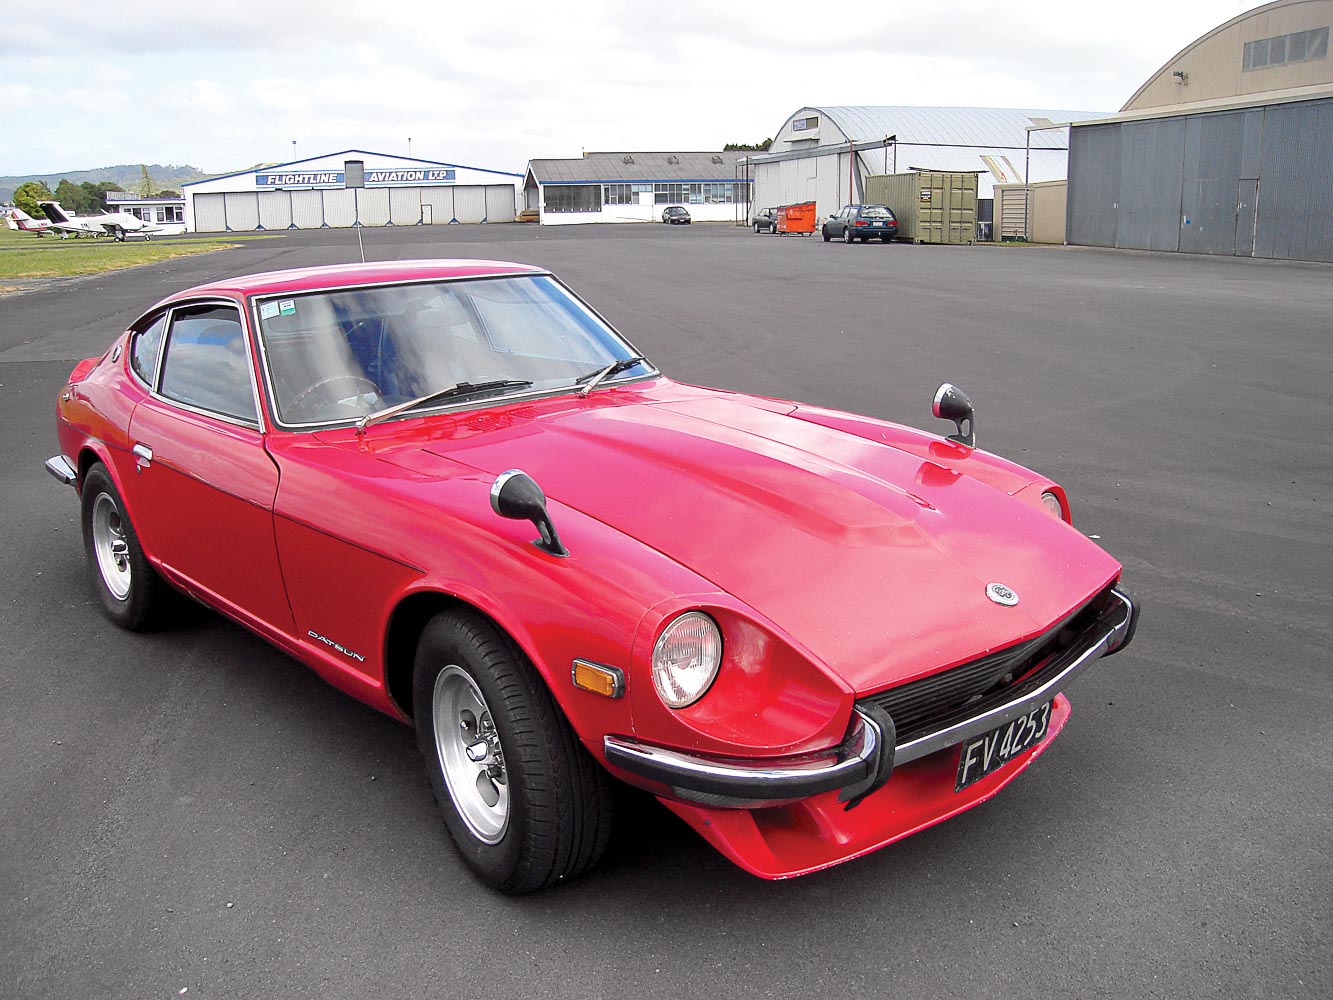 The Motorman 240Z — now painted red — in exactly the same spot at Ardmore airport in 2015